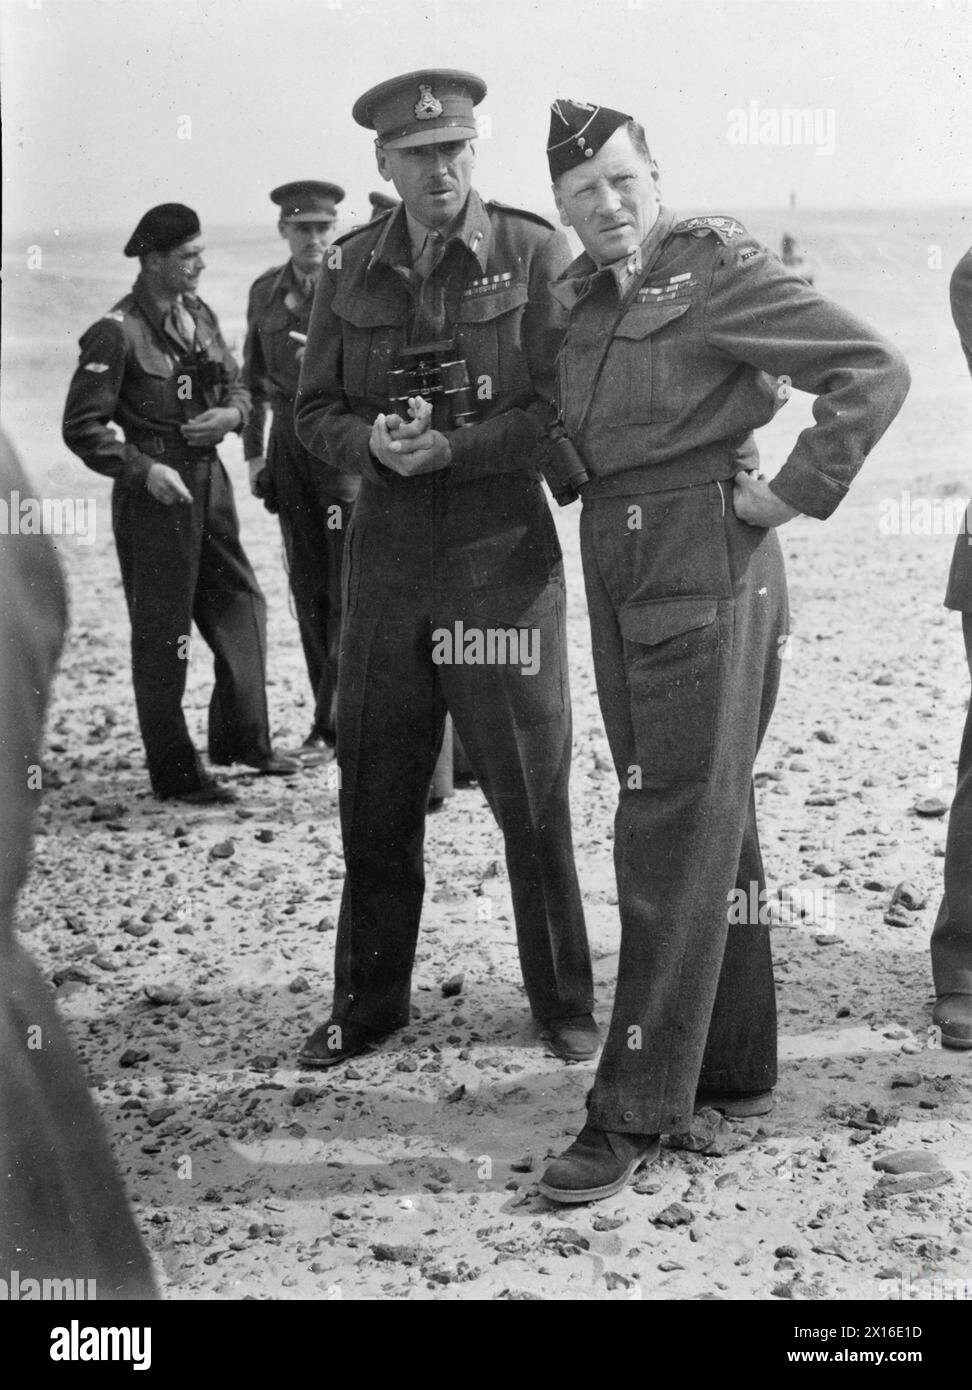 BRITISH GENERALS 1939-1945 - Major General John 'Jock' Campbell VC (1894 - 1942): Campbell and General Sir Claude Auchinleck, Commander in Chief, Middle East, in the Western Desert Campbell, John Charles 'Jock', Auchinleck, Claude John Eyre Stock Photo